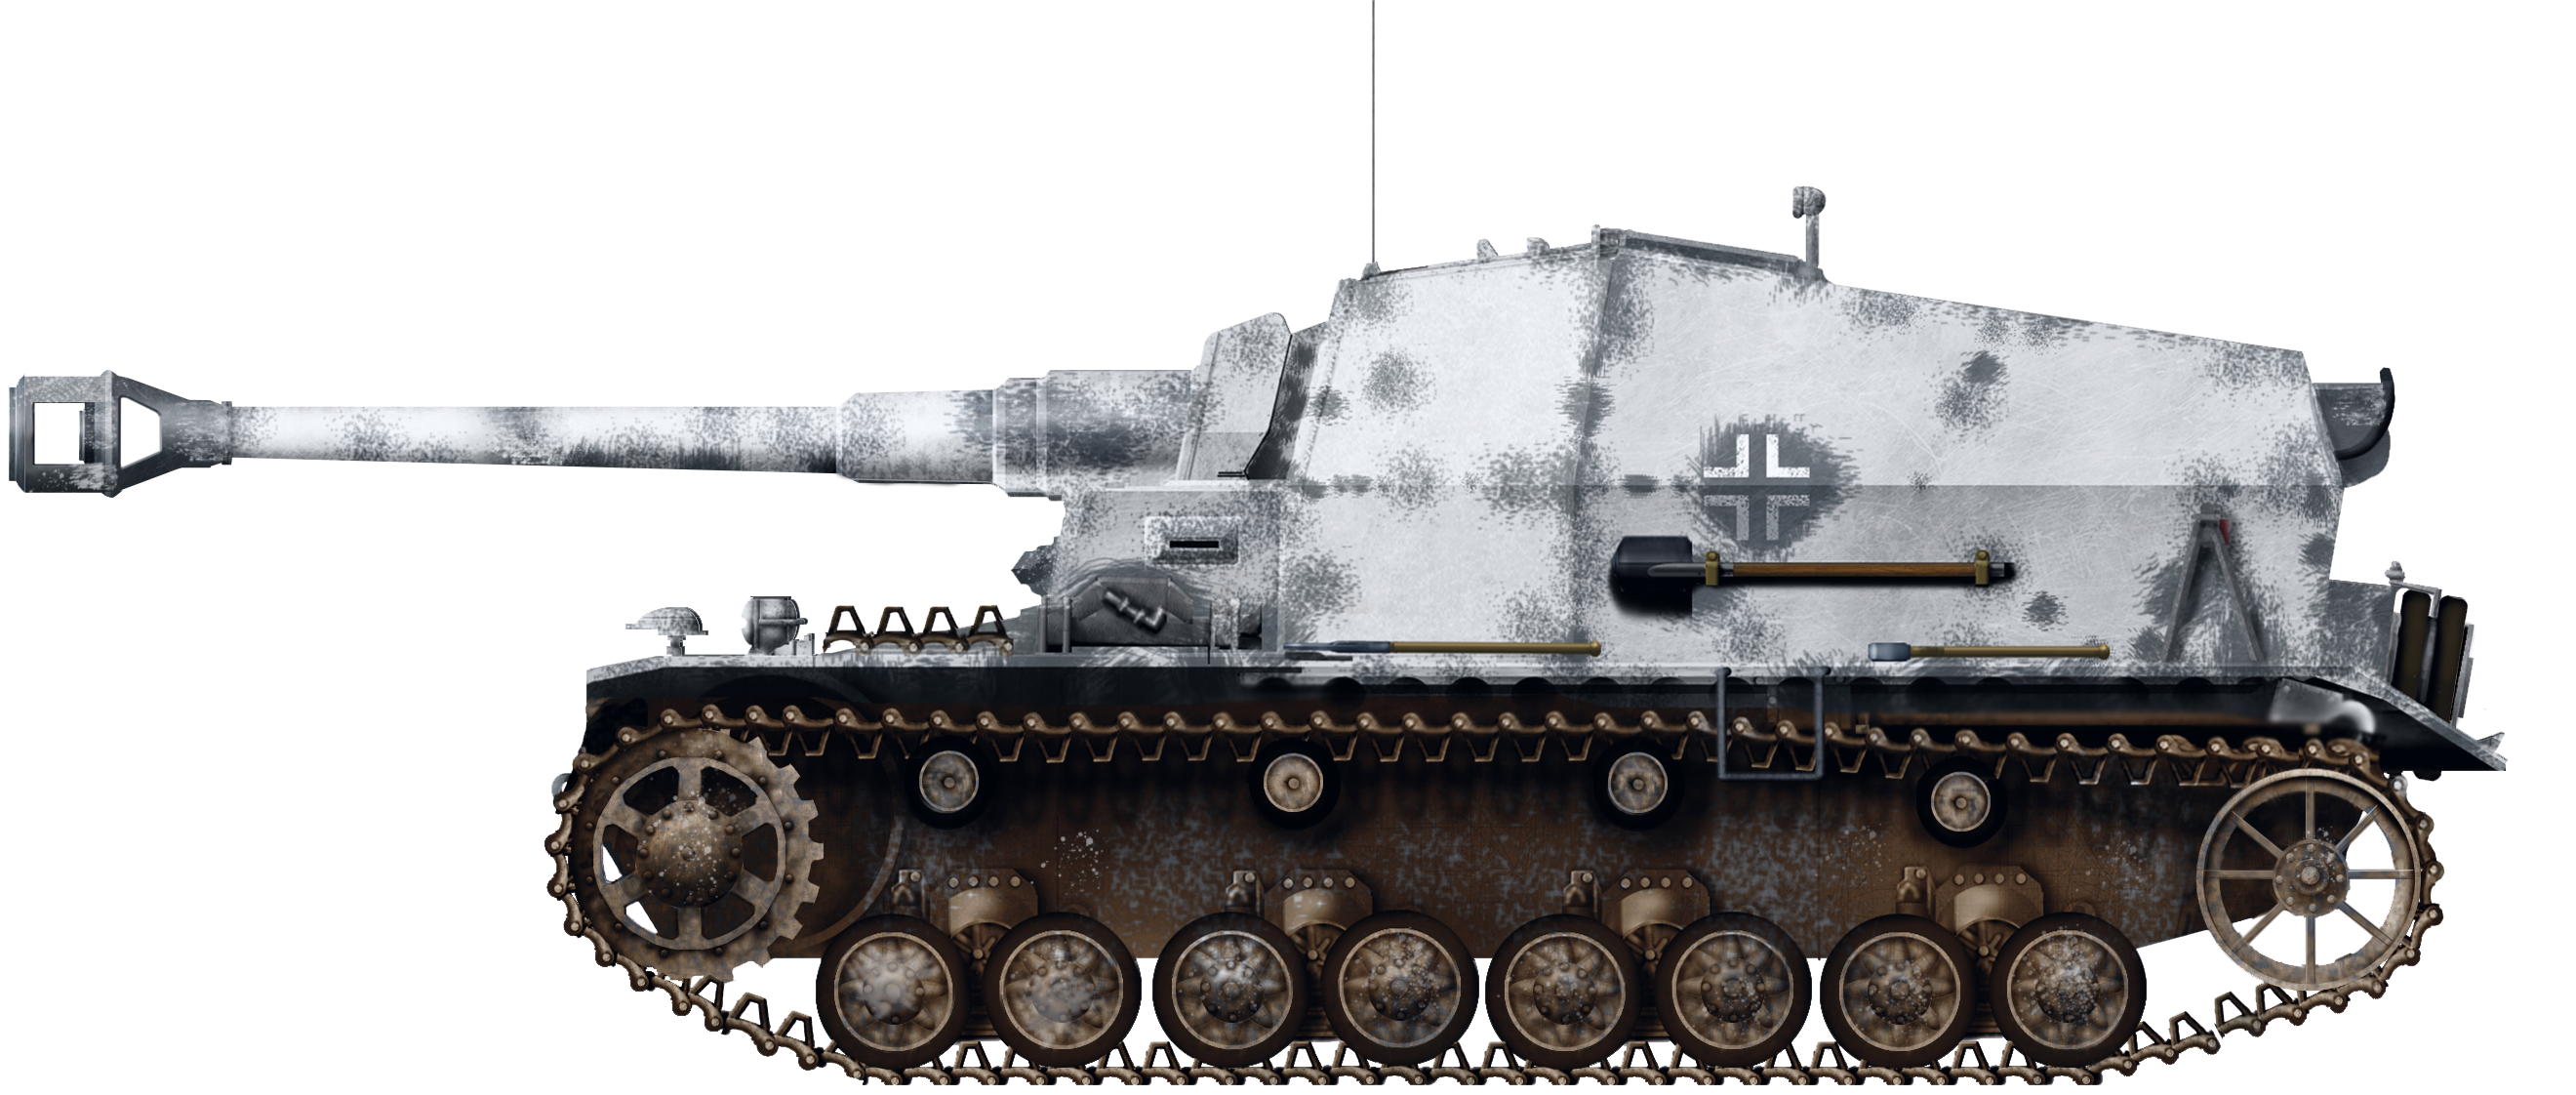 Doubts in camo schemes and markings on German Elefant - WWII Axis